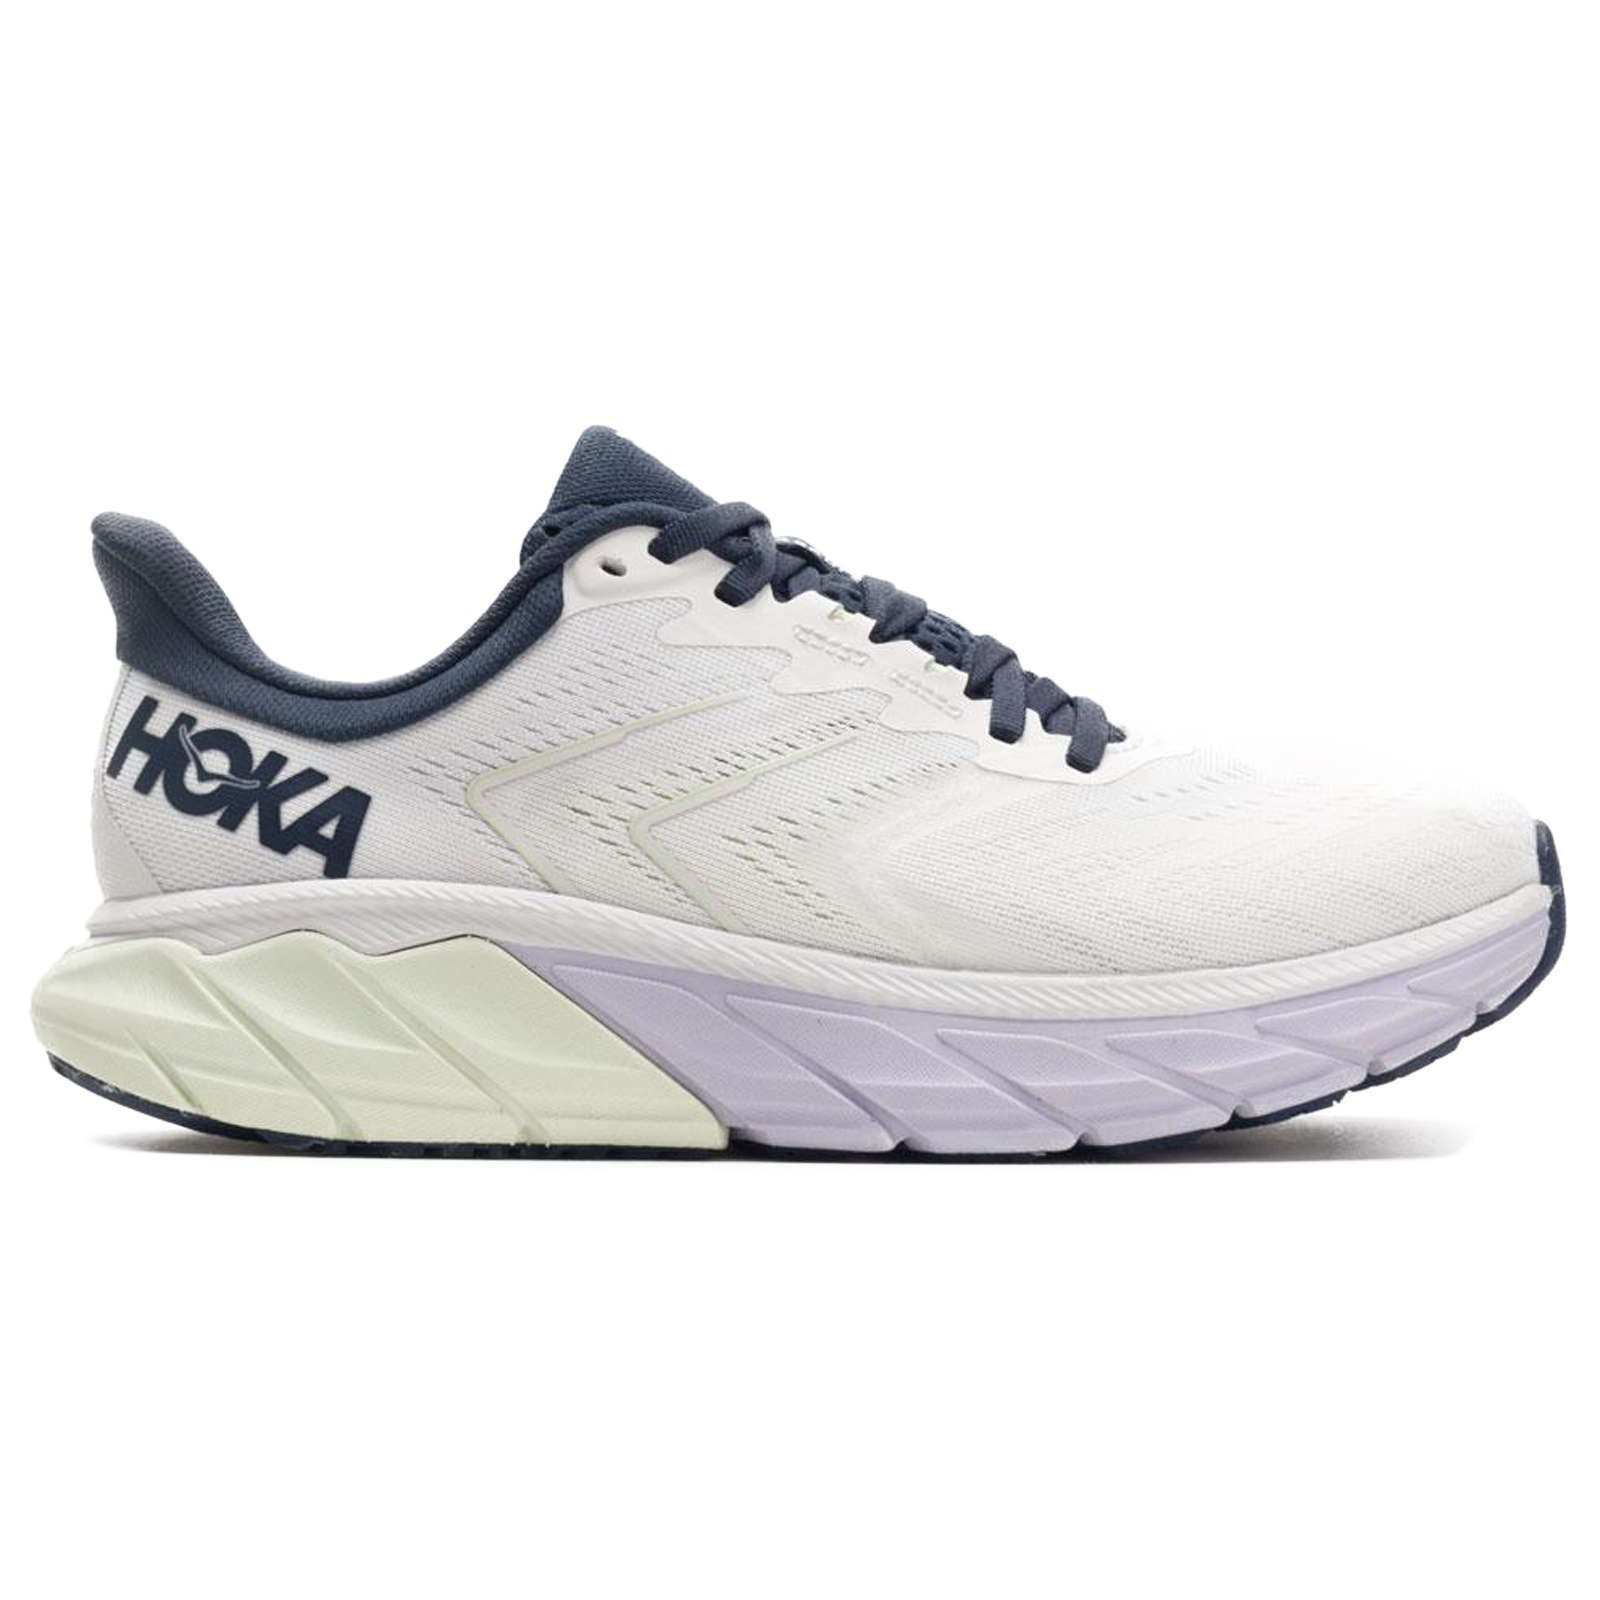 Hoka One One Arahi 5 Synthetic Textile Women's Low-Top Road Running Sneakers#color_blanc de blanc outer space